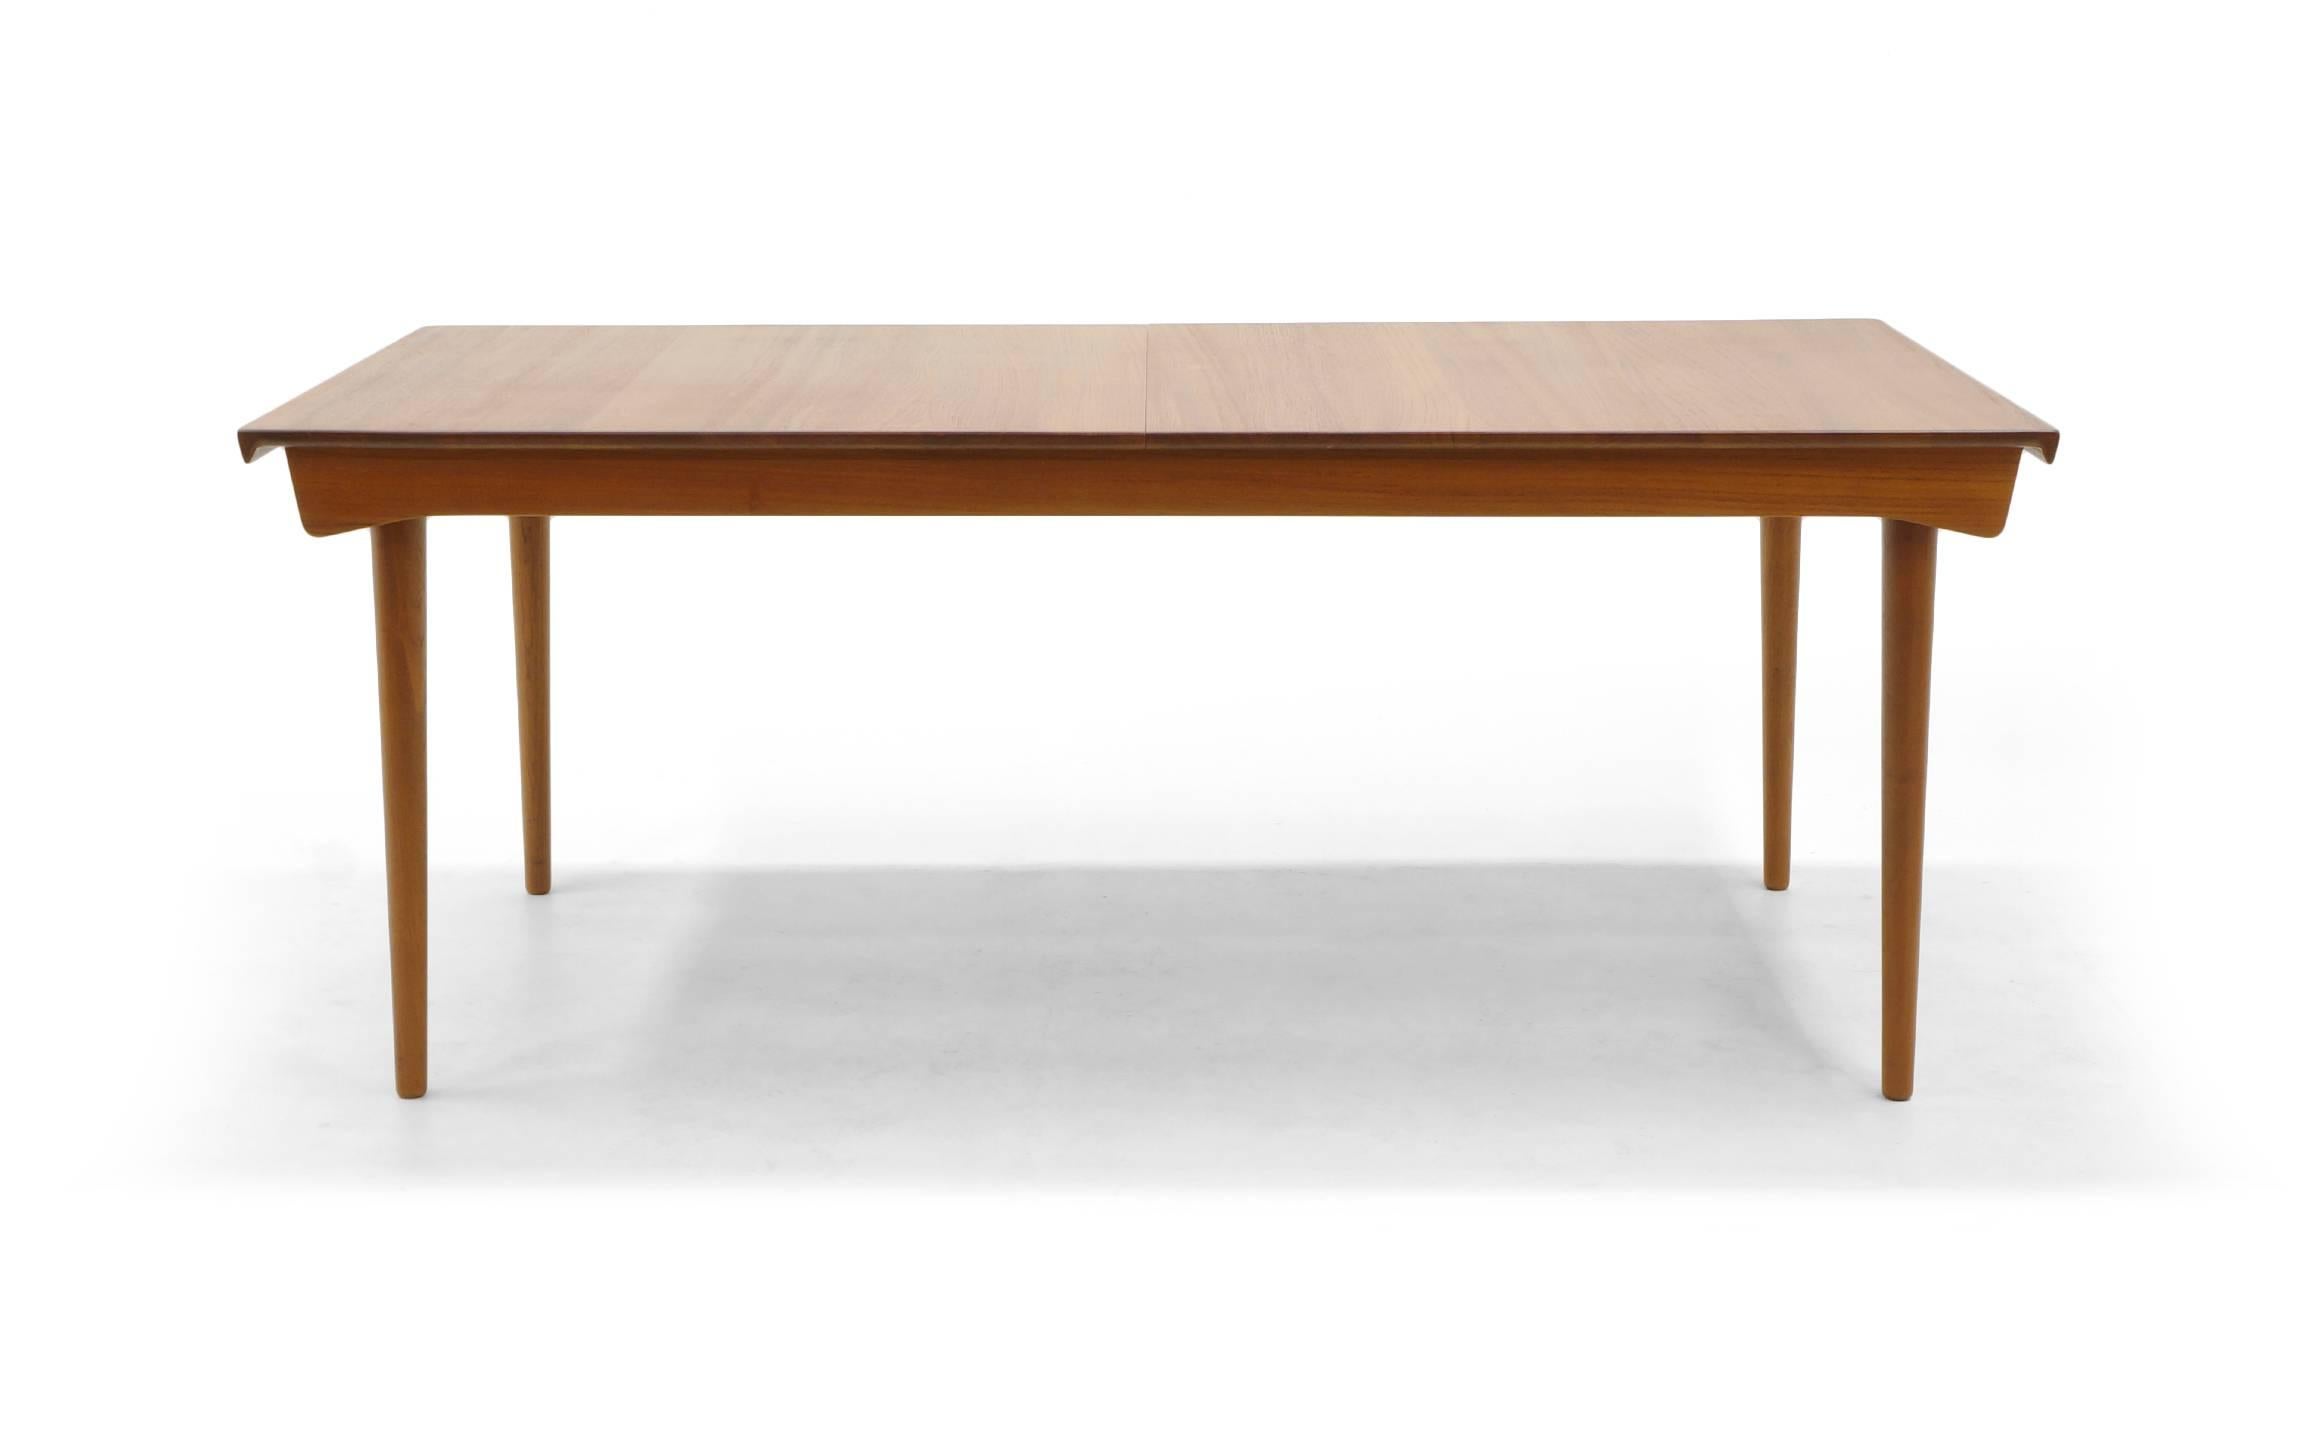 Mid-20th Century Finn Juhl Teak Dining Table, Expandable with Two Leaves, Exceptional Condition